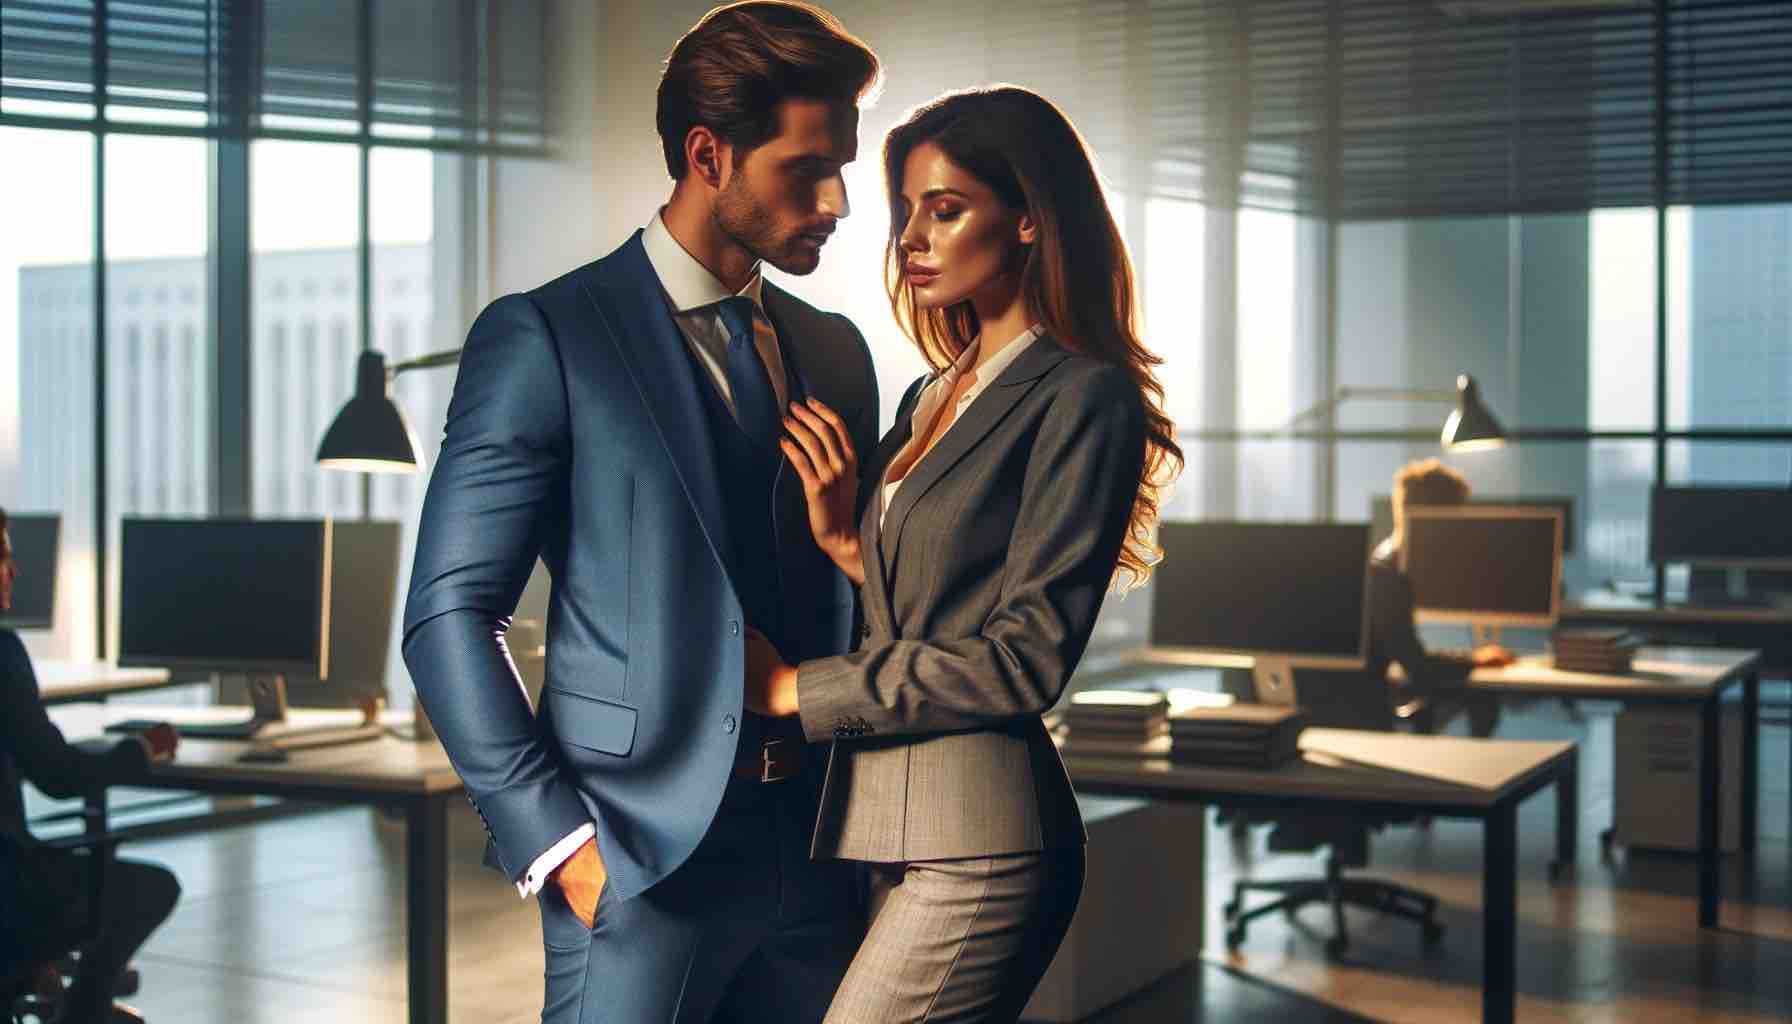 Intimate Relationship In The Workplace